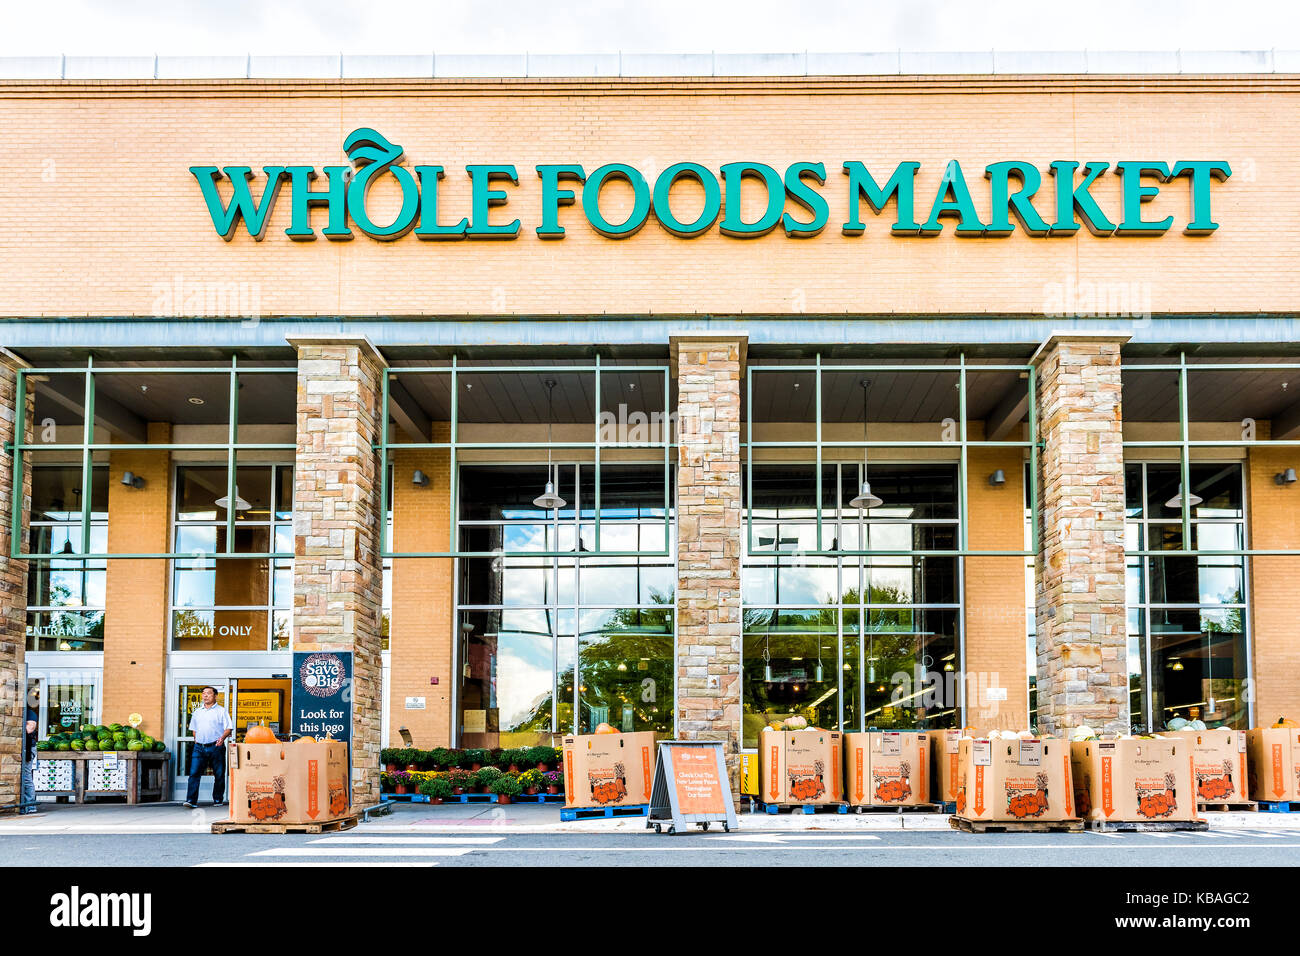 Fairfax, USA - September 8, 2017: Green Whole Foods Market grocery store sign on exterior building in city in Virginia with people walking and autumn  Stock Photo